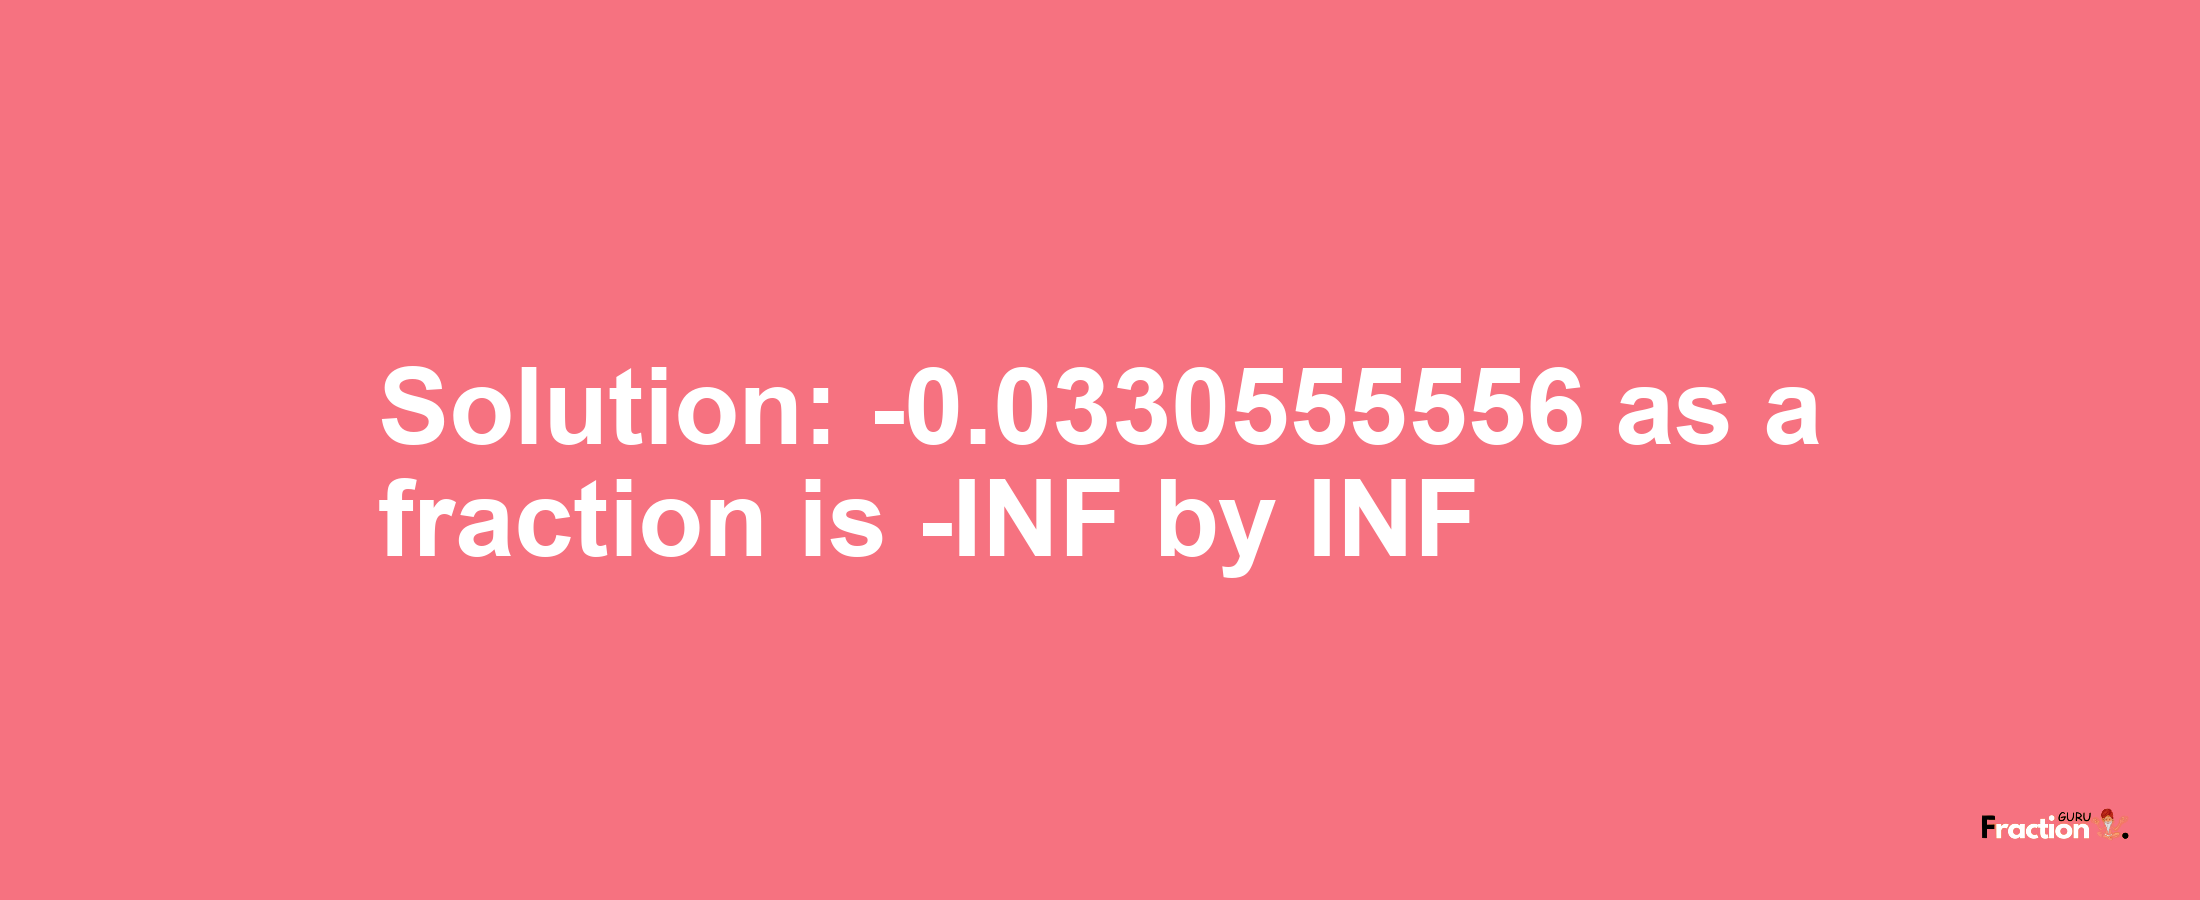 Solution:-0.0330555556 as a fraction is -INF/INF